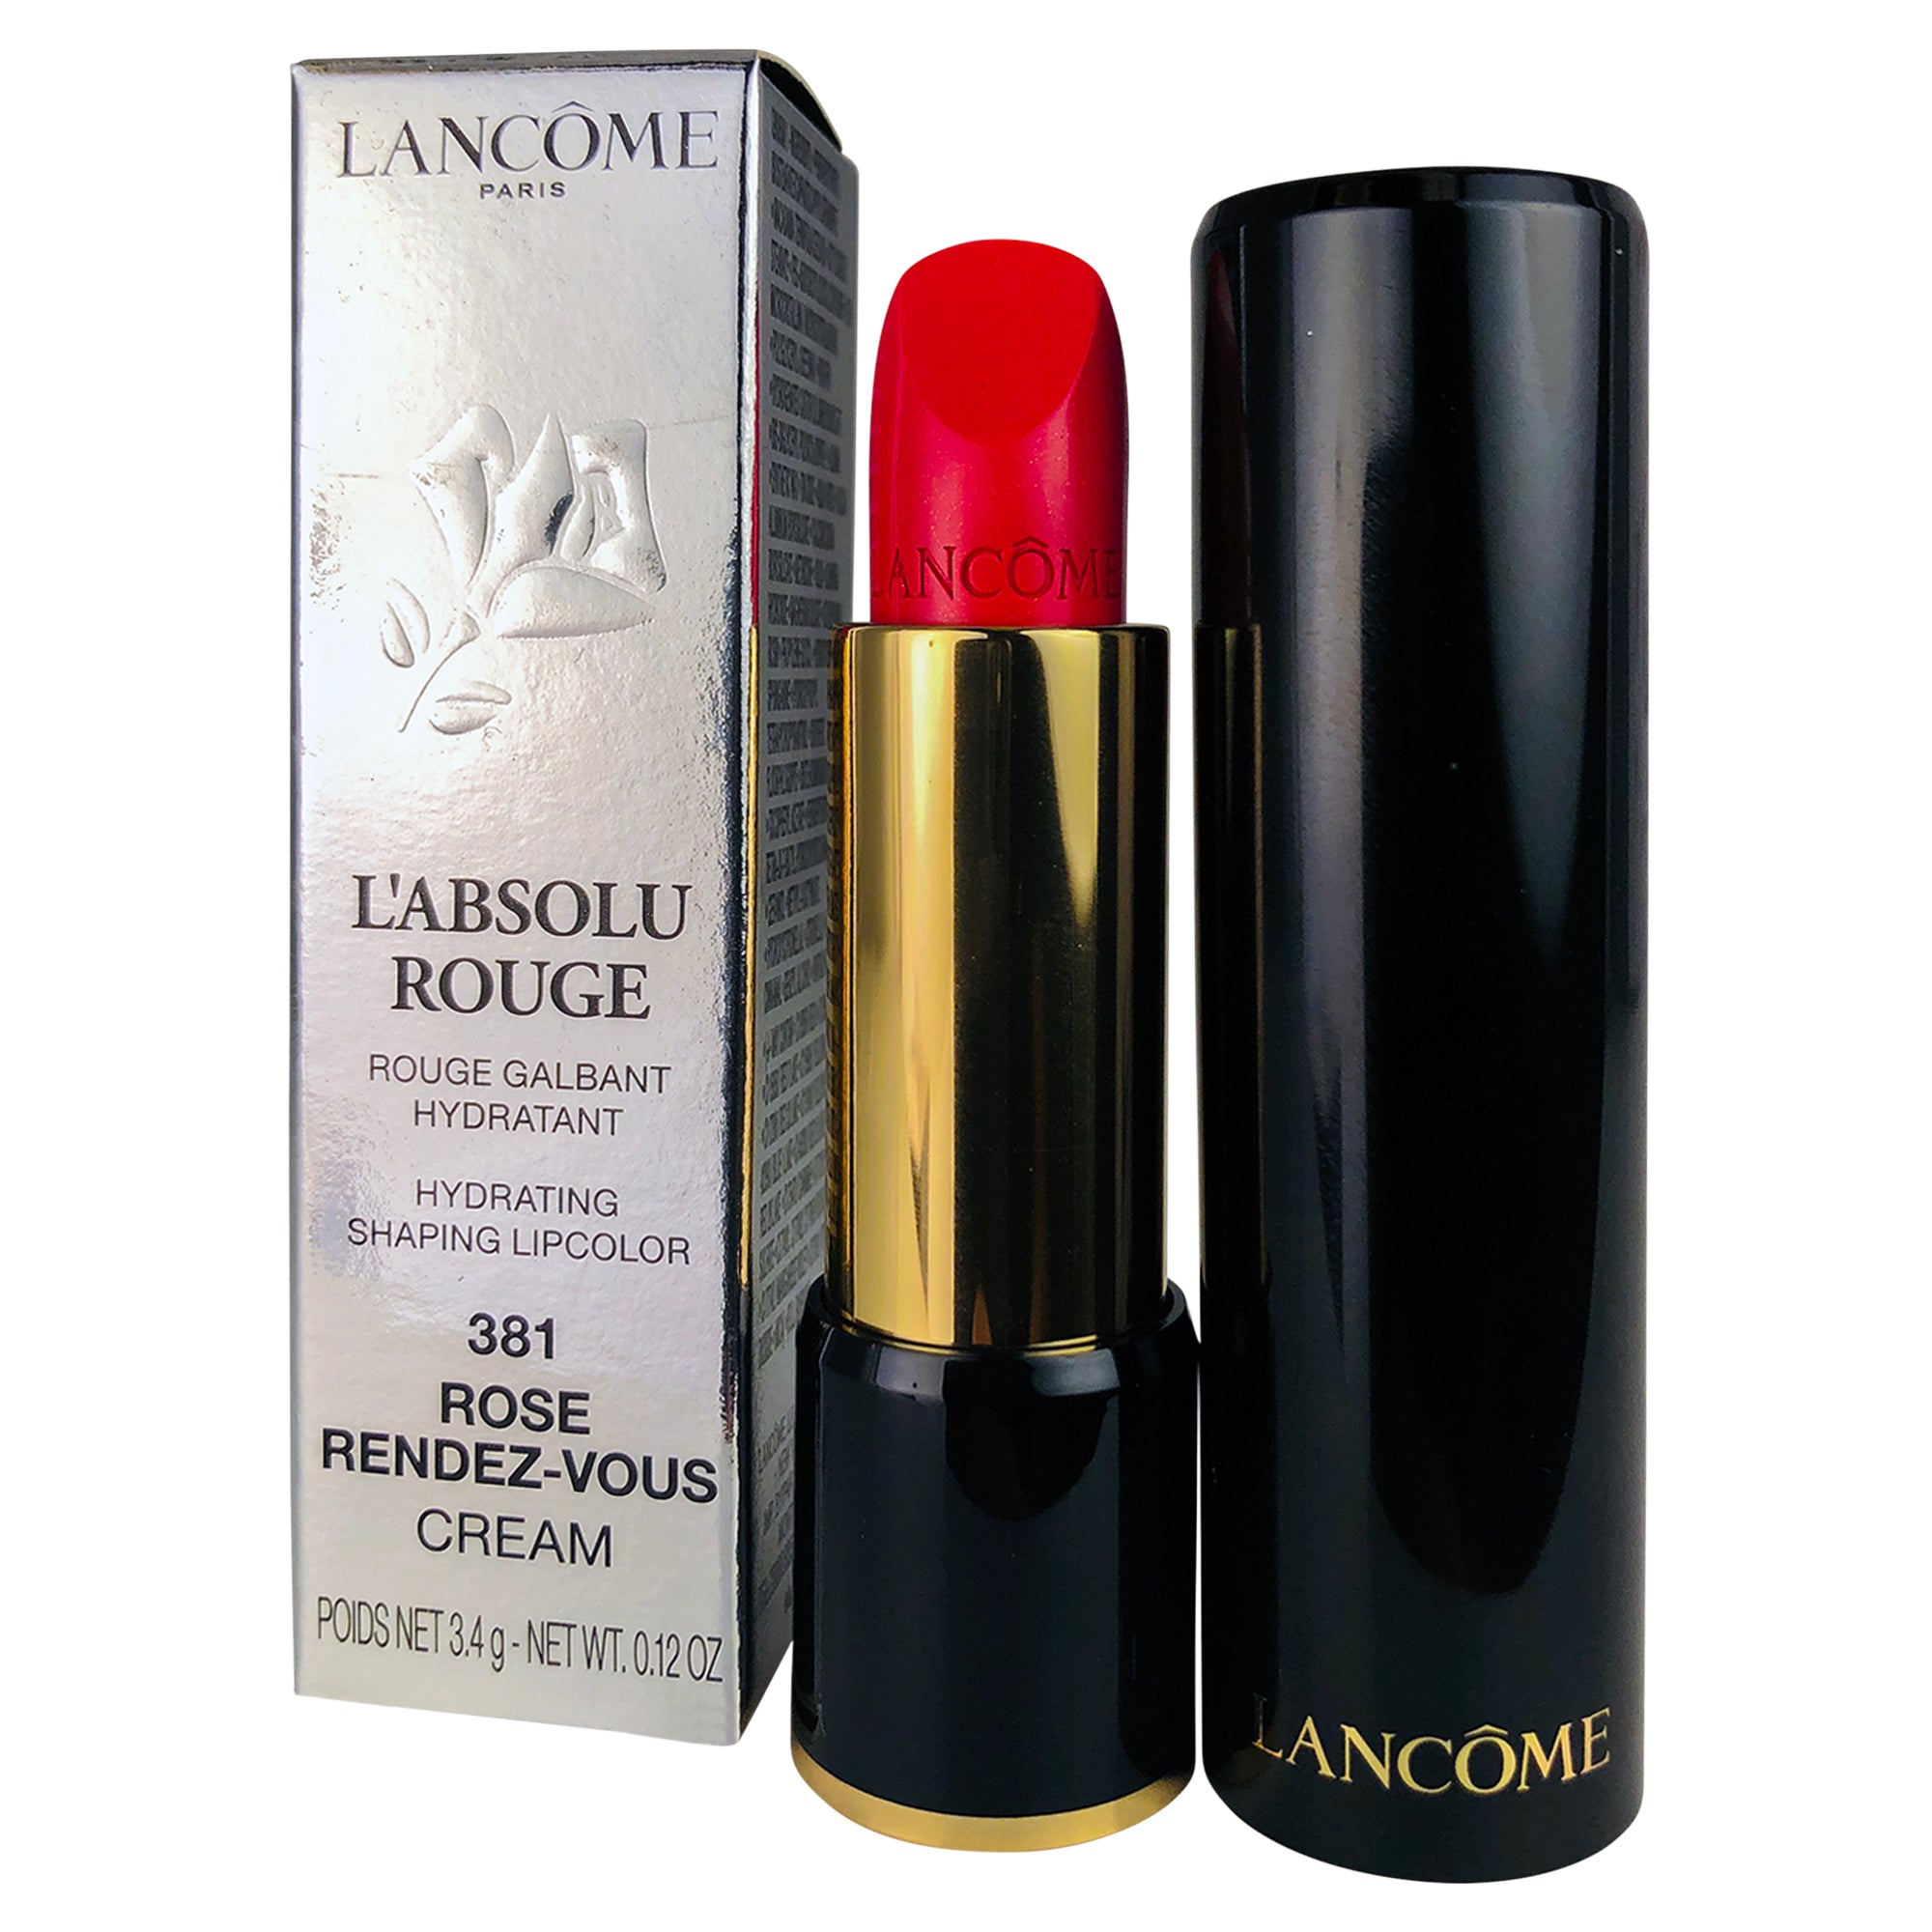 Lancome L'Absolu Rouge Hydrating Shaping Lip Color 381 Rose Rendez-Vous Cream